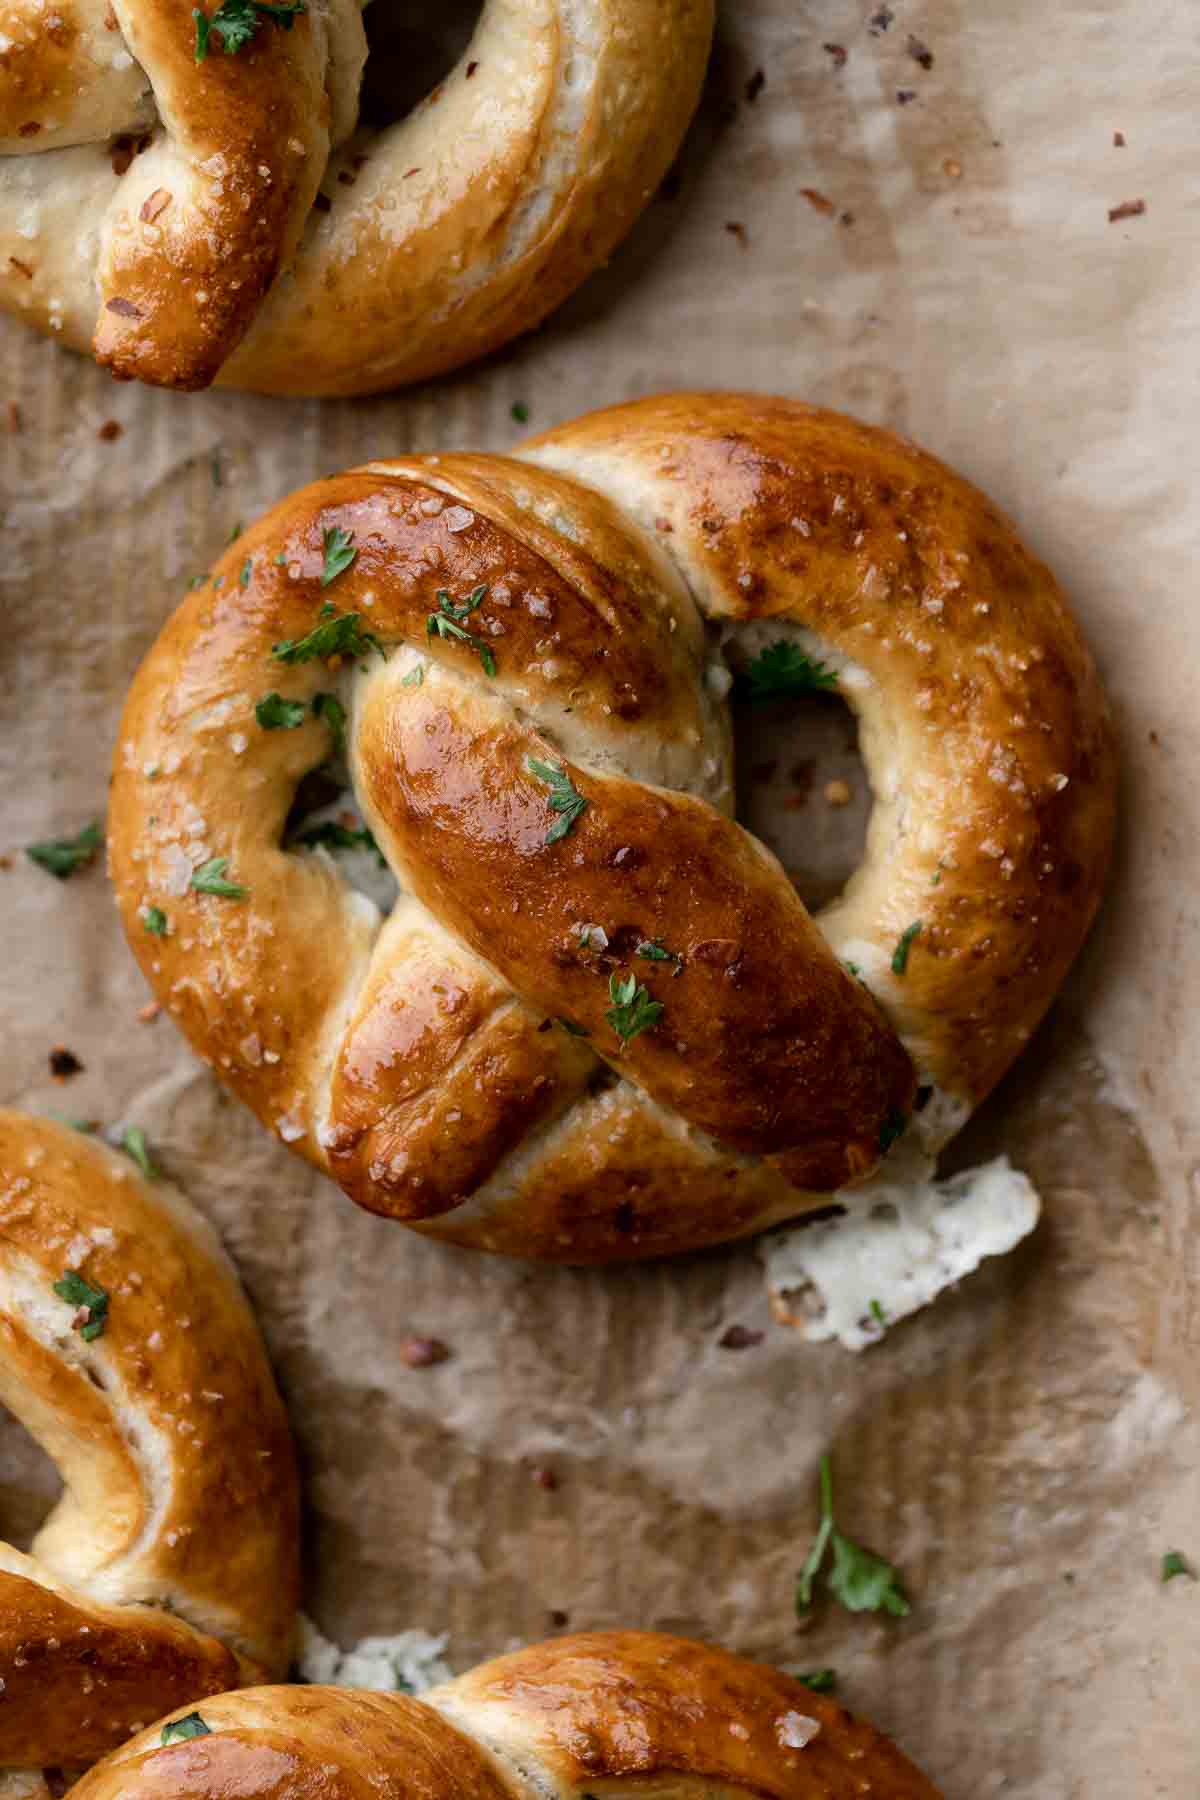 stuffed pretzels on a parchment lined baking tray.